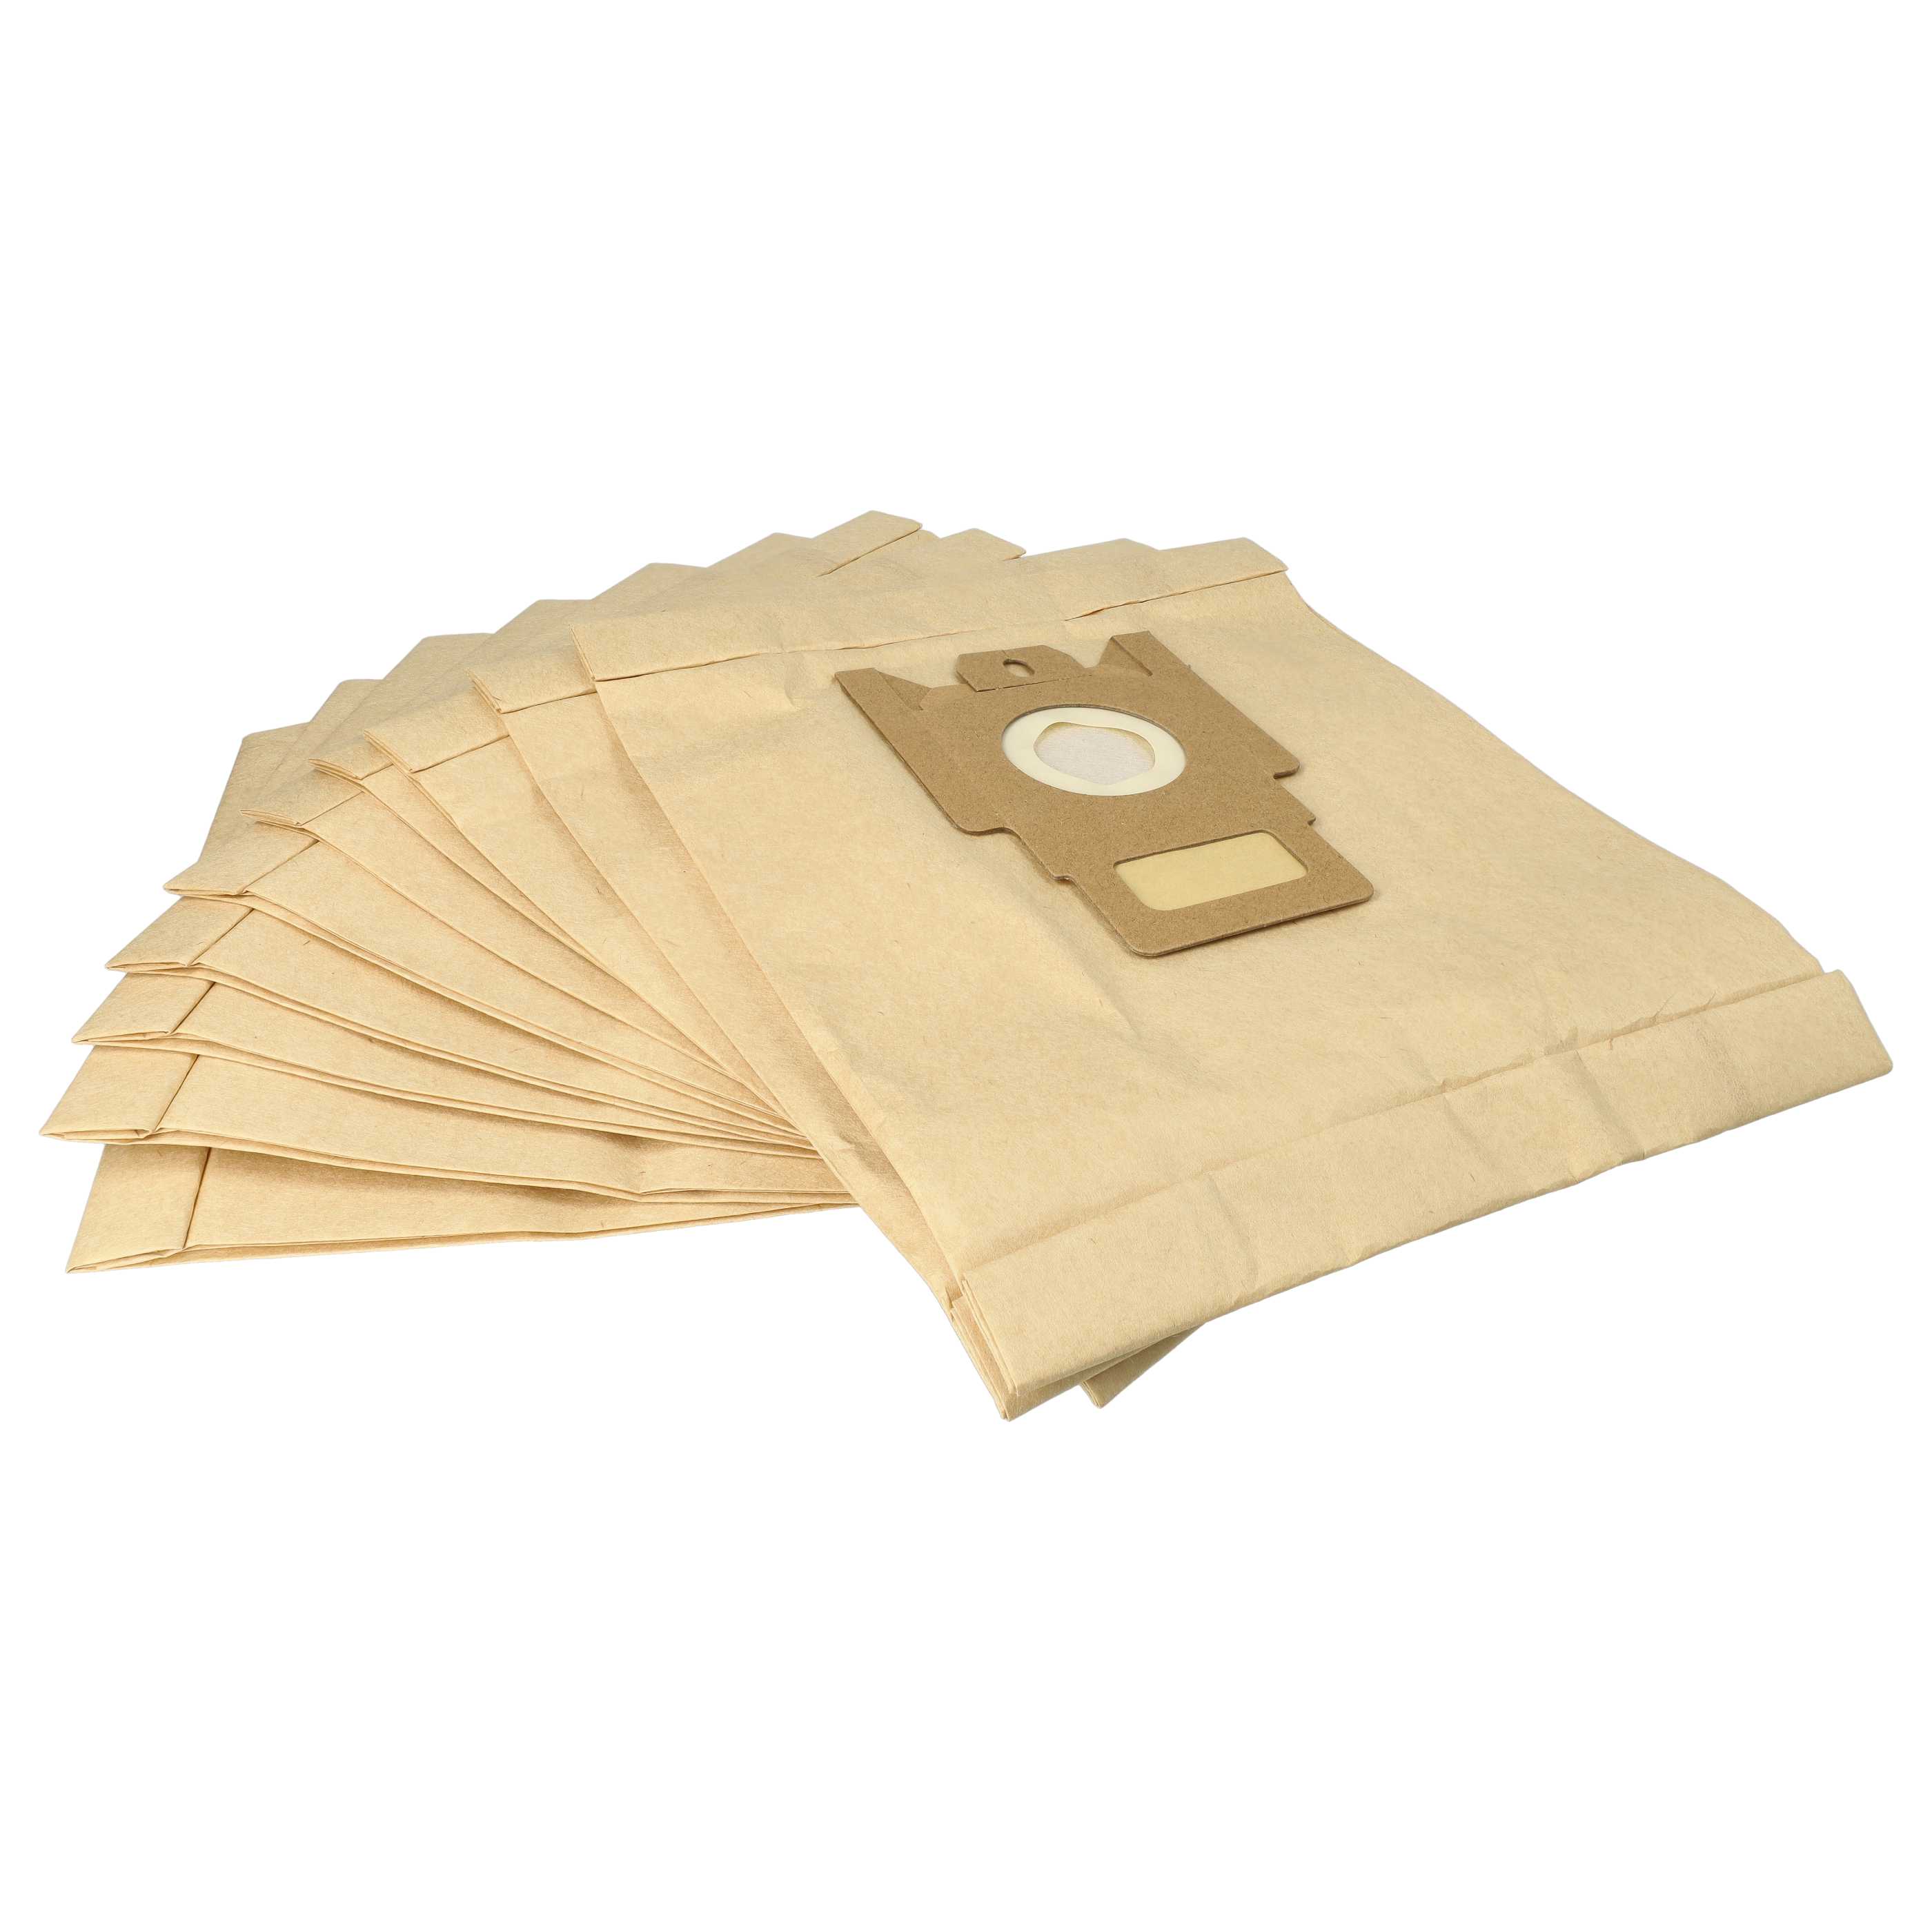 10x Vacuum Cleaner Bag suitable for H22 Hoover, Miele H22 - paper